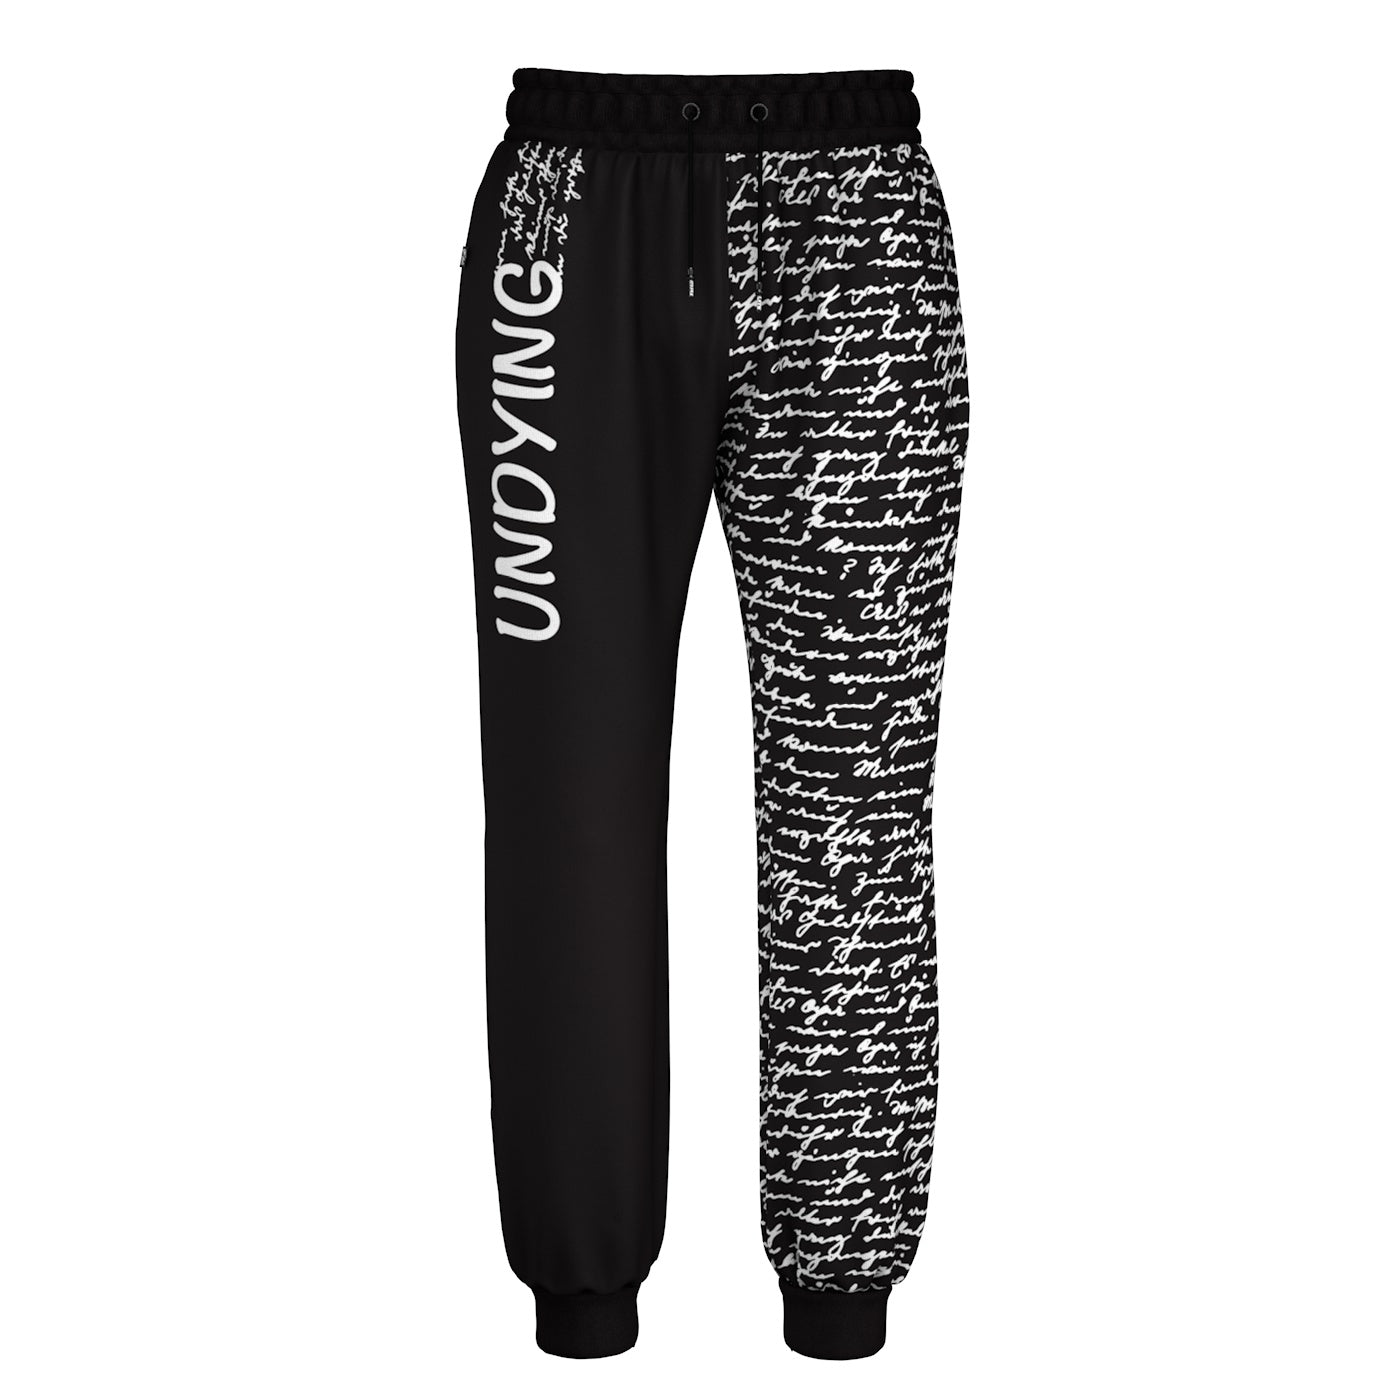 Undying Sweatpants